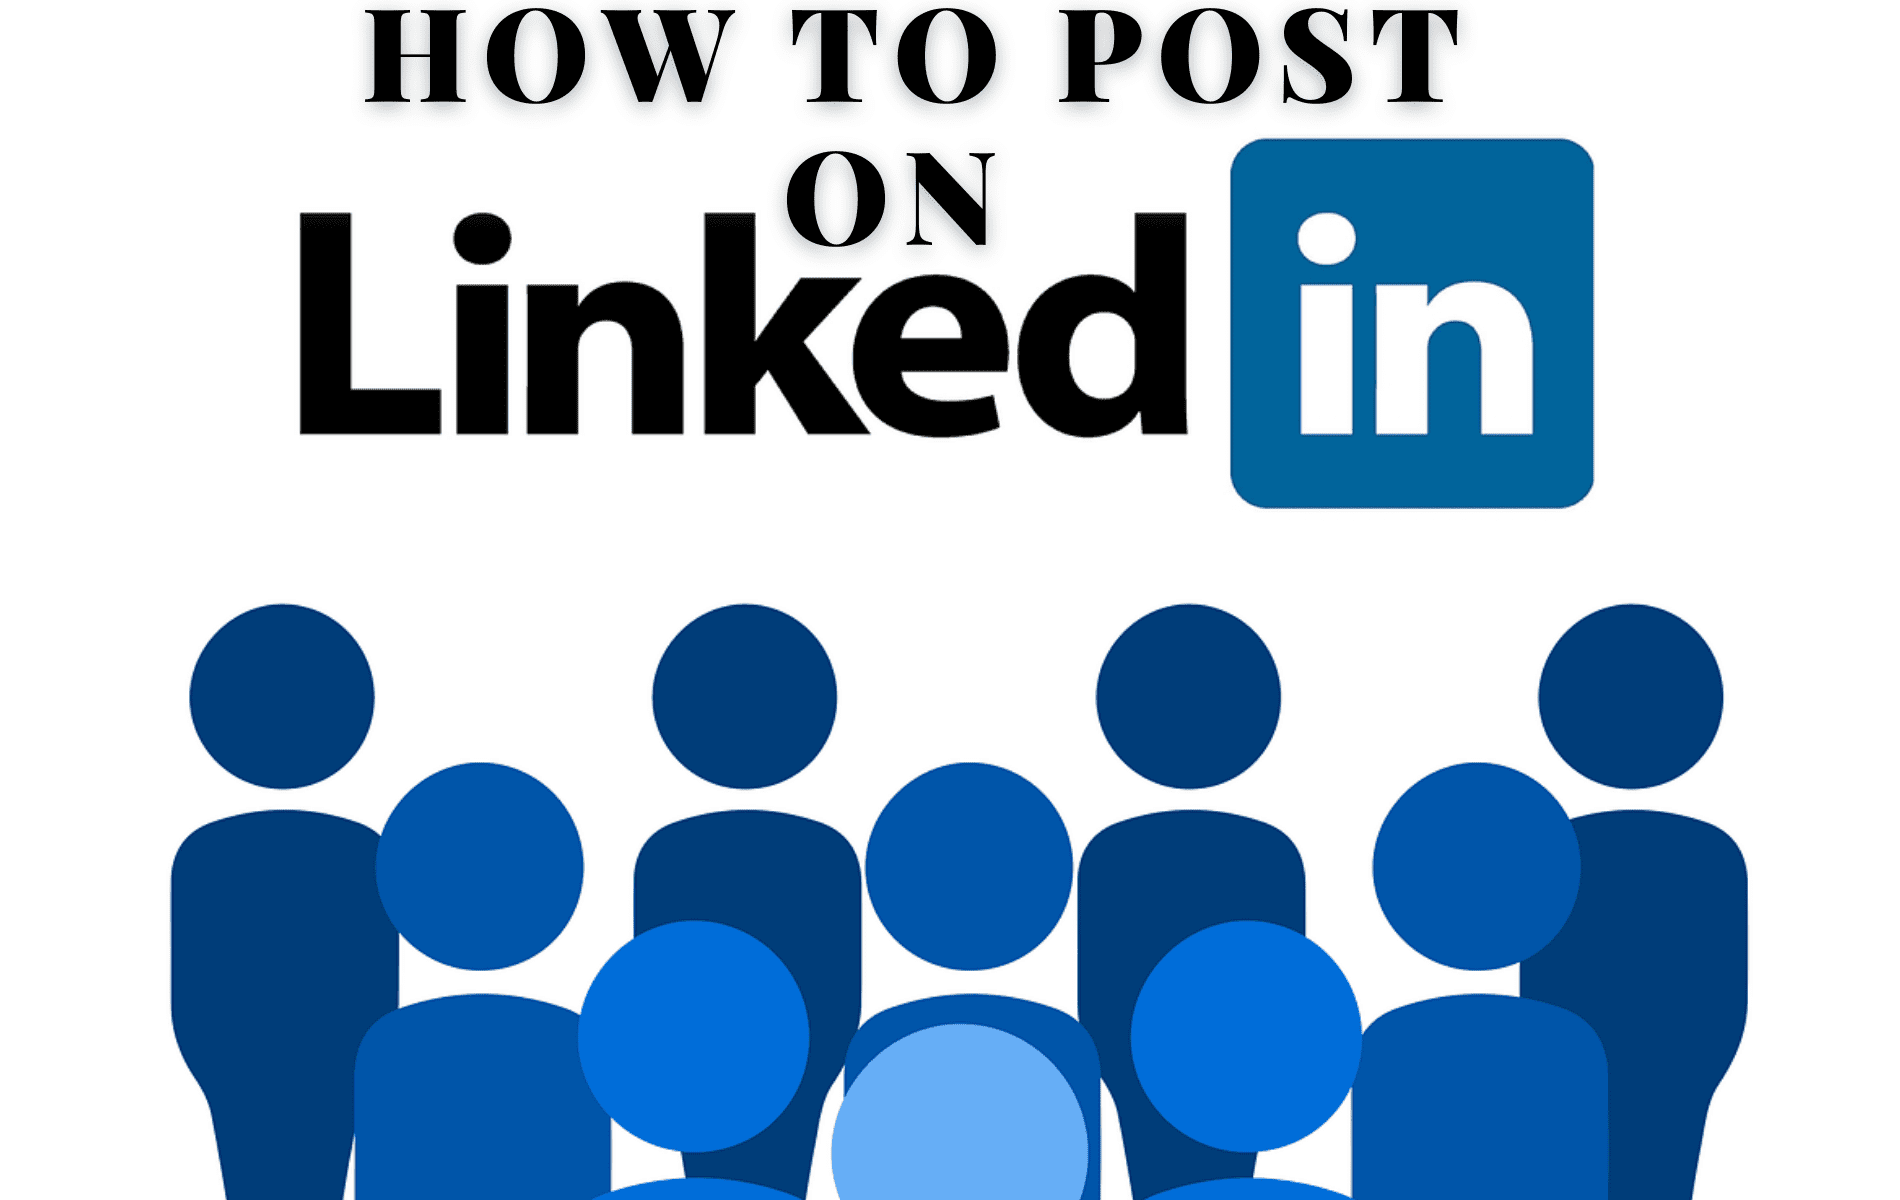 How to Post on LinkedIn A Quick Guide (2020)